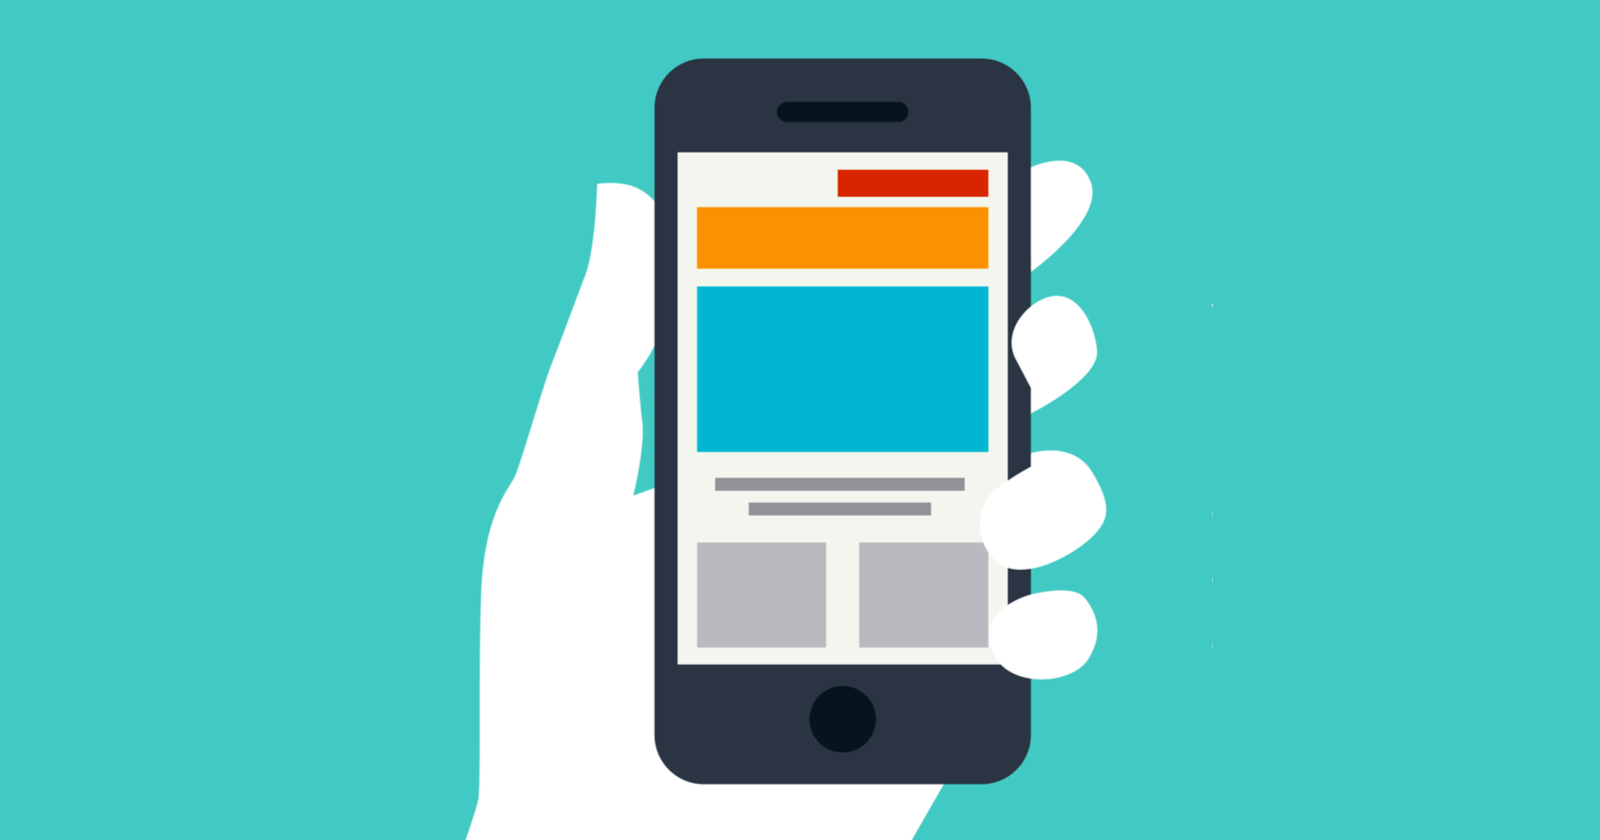 10-tips-for-creating-mobile-friendly-content-614dbc4c12afe-sej.png